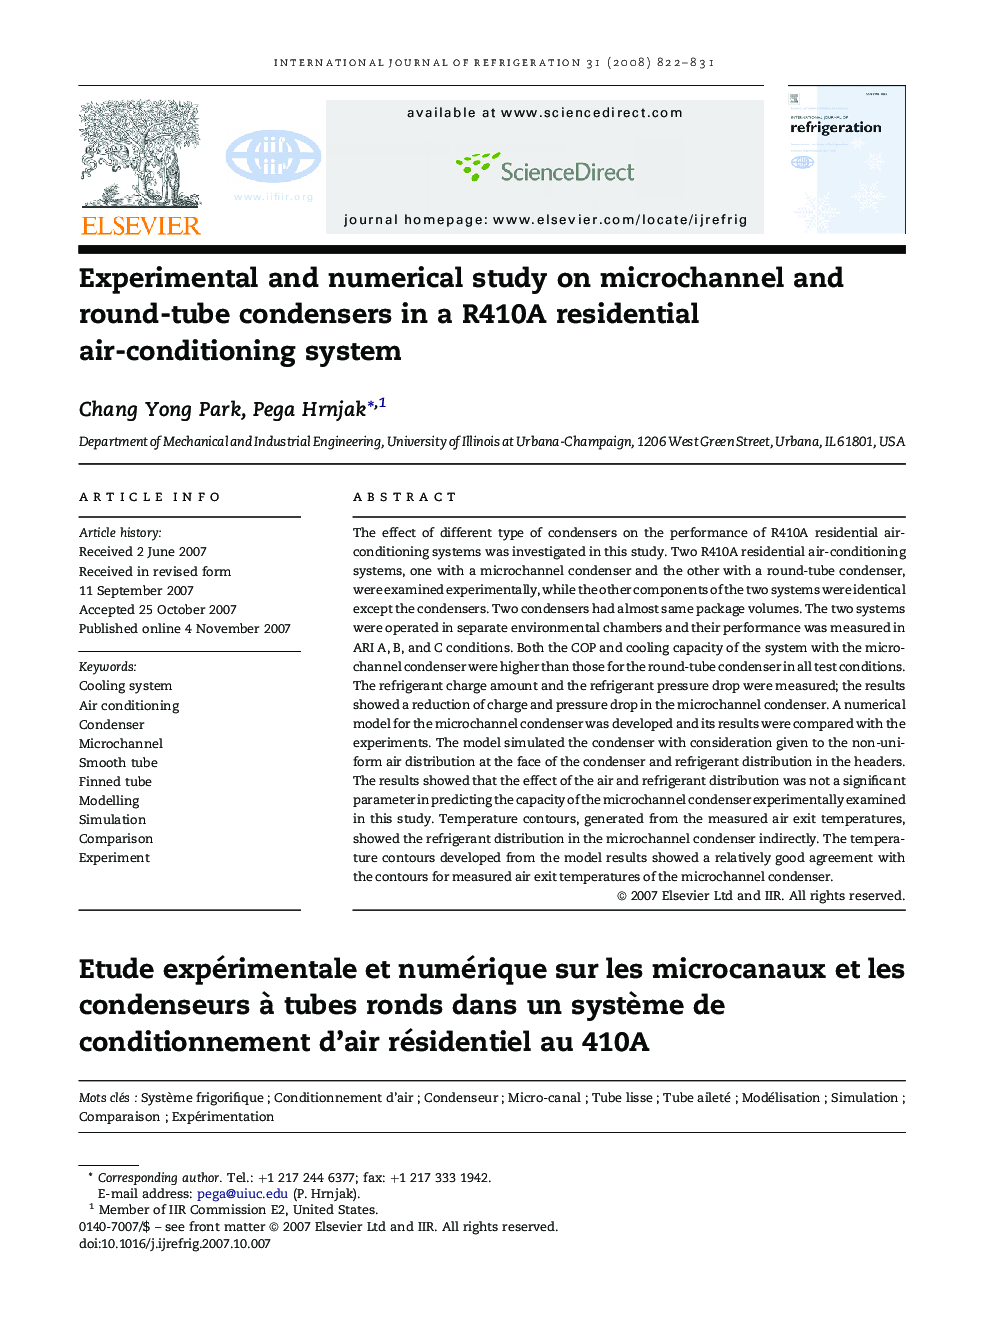 Experimental and numerical study on microchannel and round-tube condensers in a R410A residential air-conditioning system